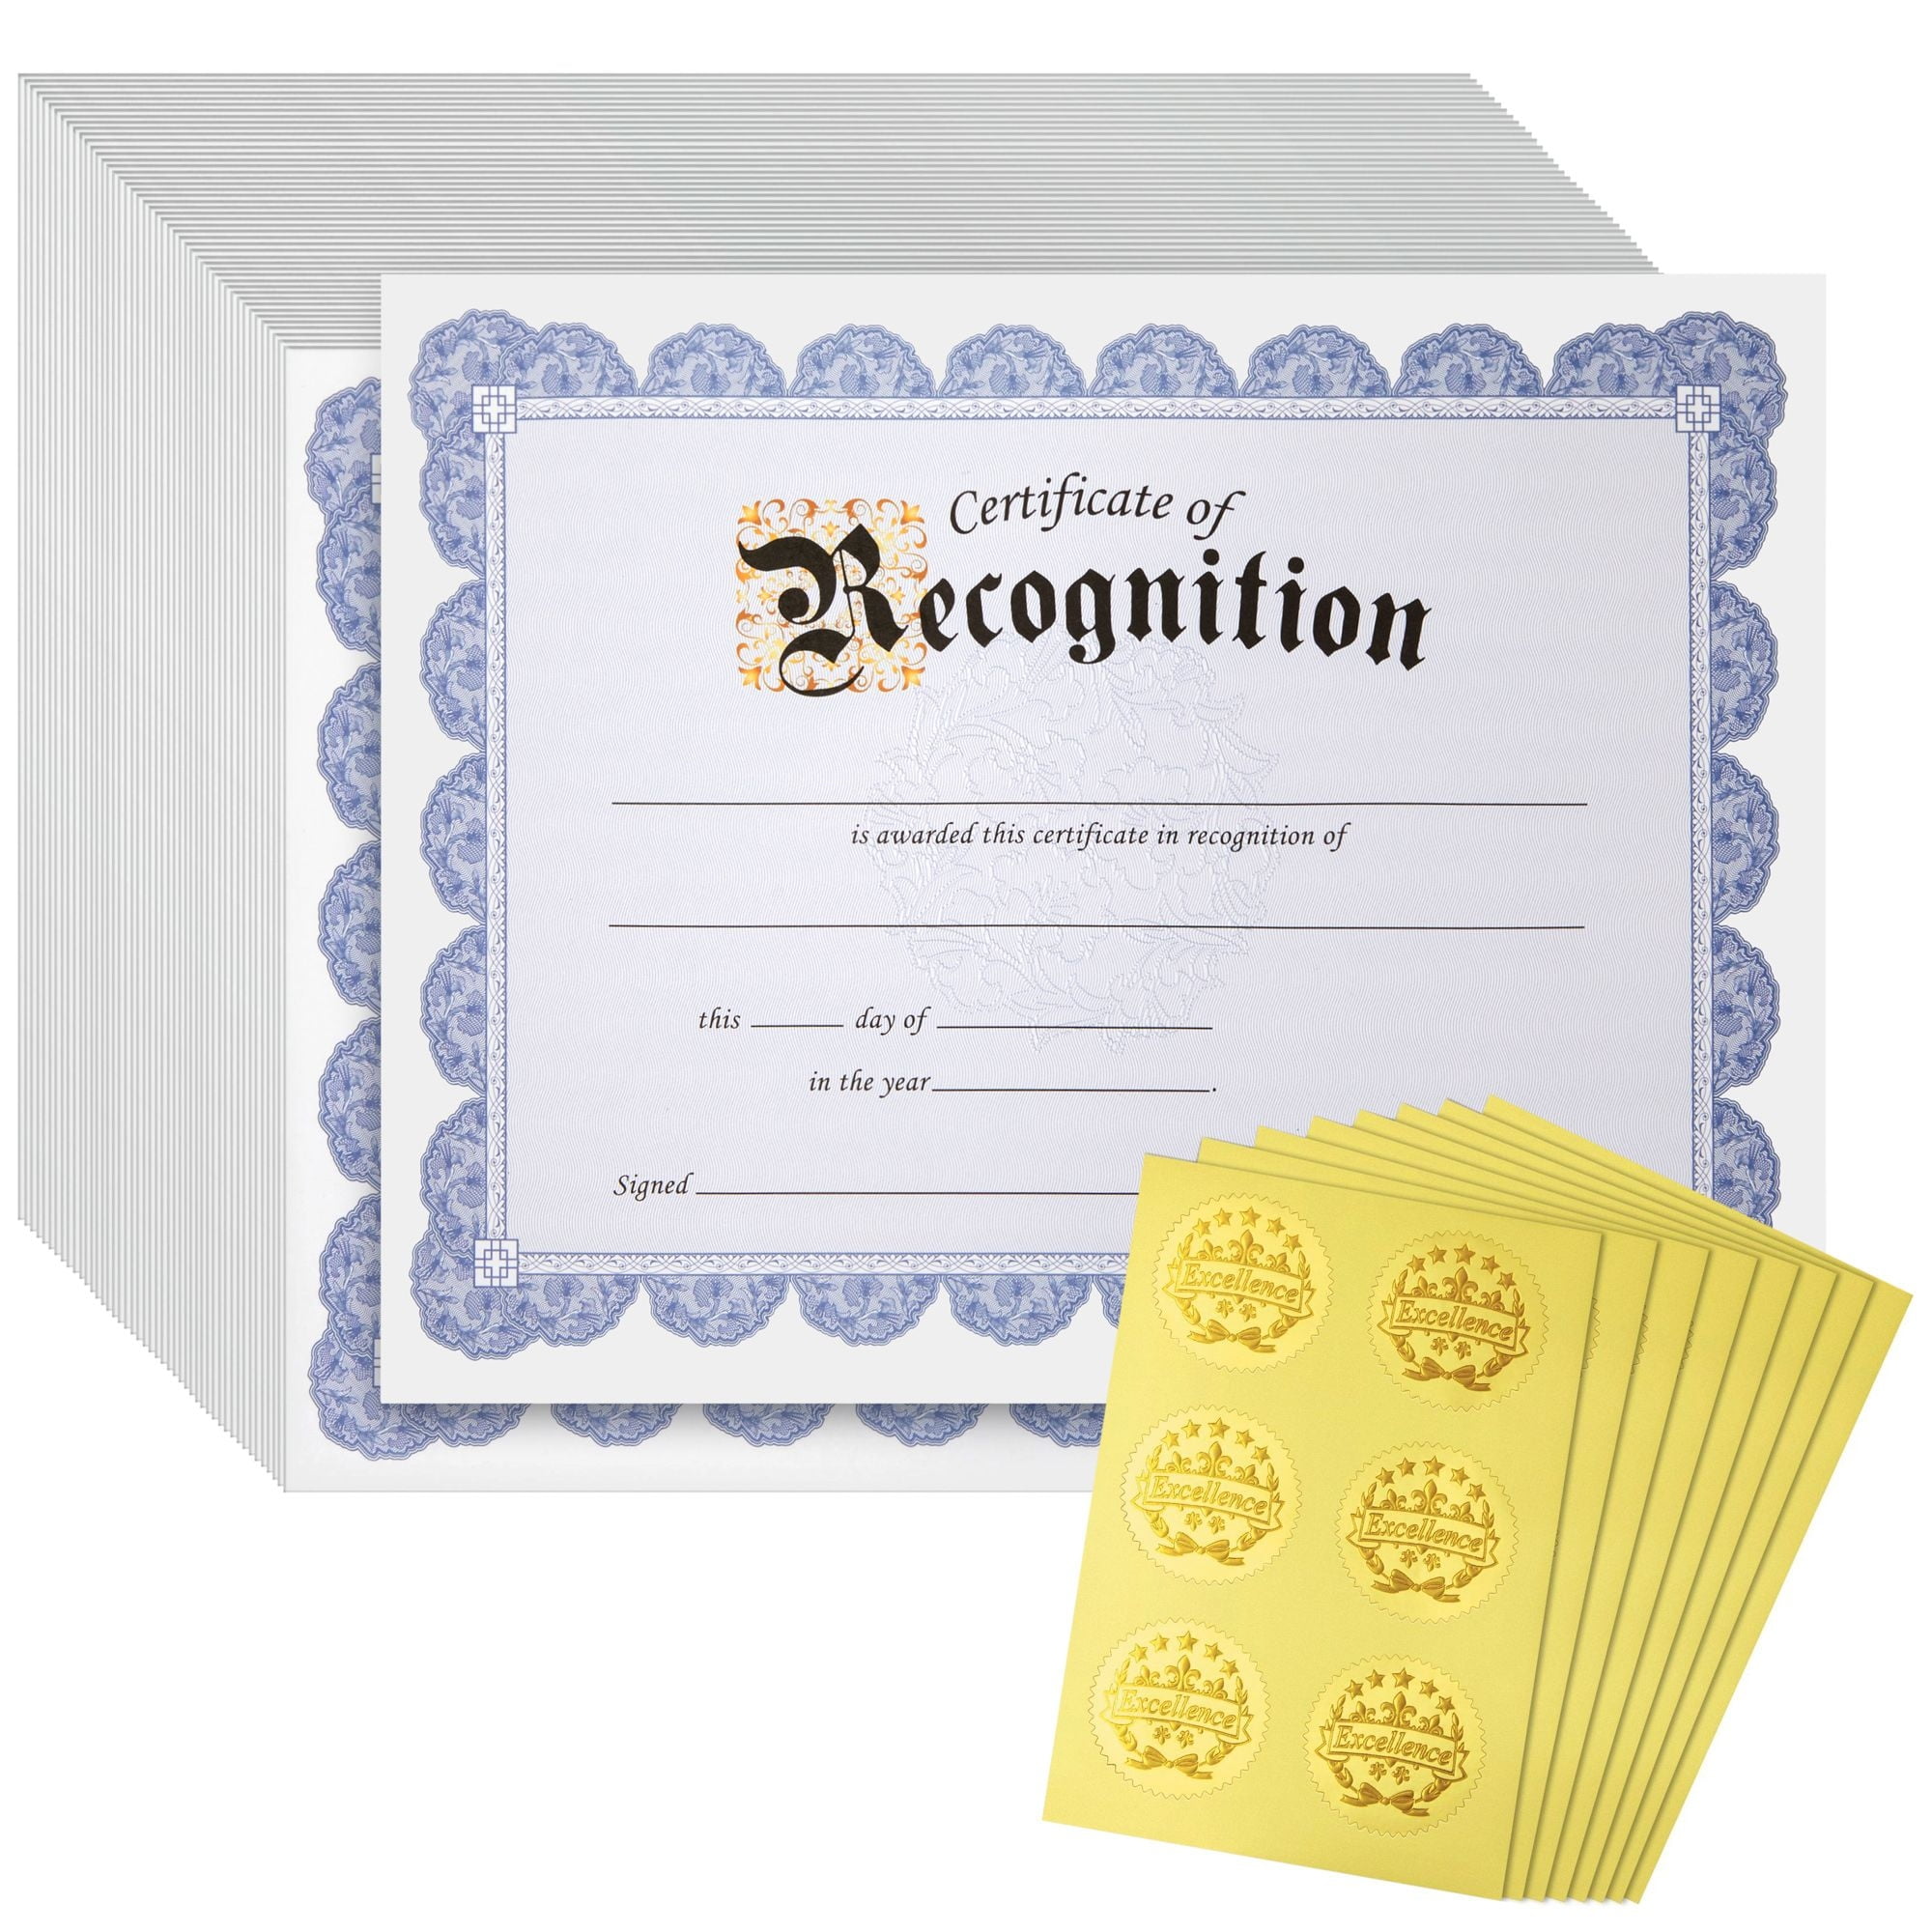 47860 Geographics Award Certificate Kit, 8.5 x 11 Blank Certificate Paper,  Gold Foil Seals & Blue Ribbon Stickers (Pack of 25)